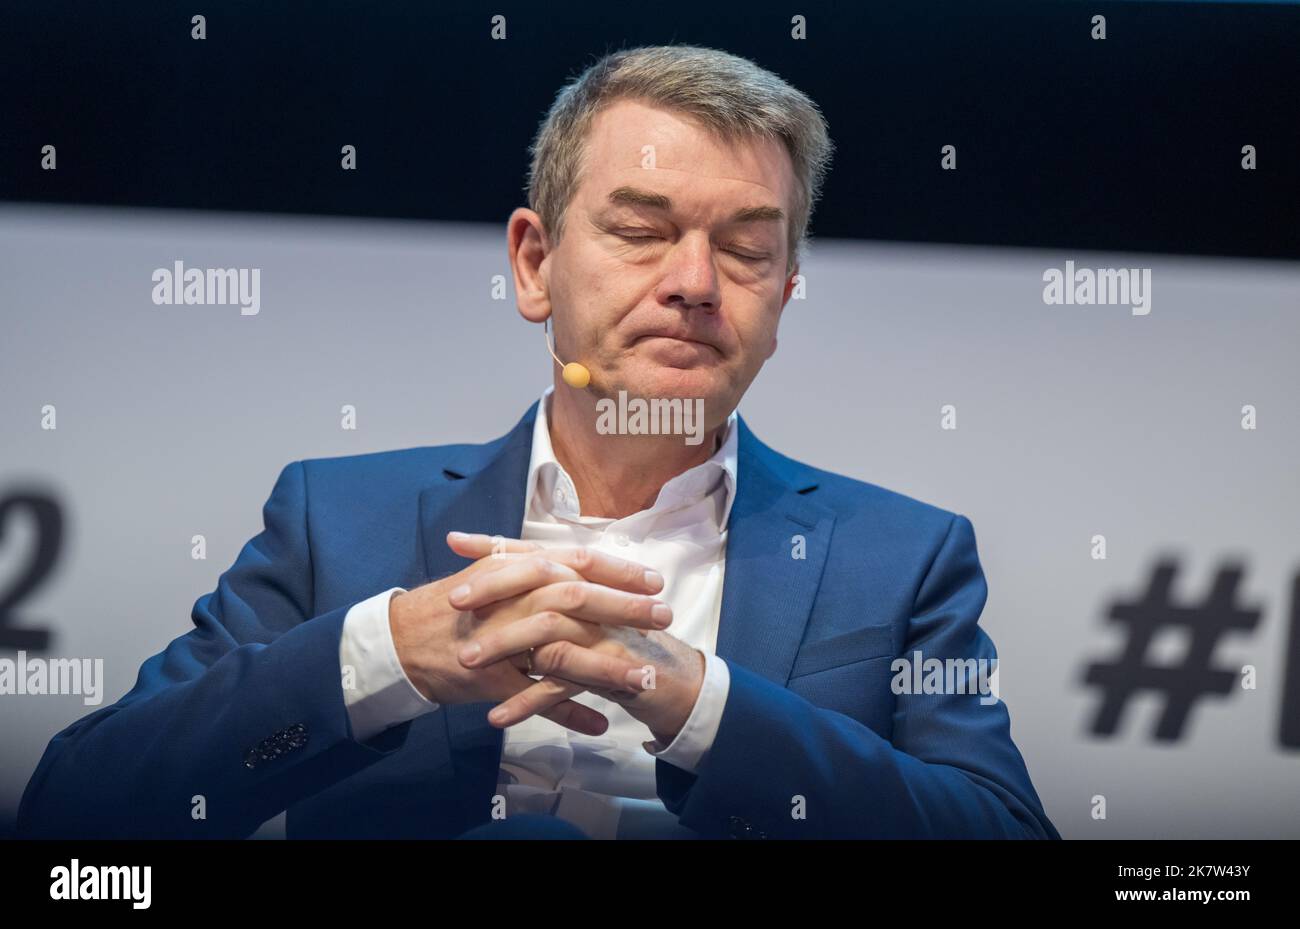 Munich, Germany. 19th Oct, 2022. Jörg Schönenborn, Program Director Information, Fiction and Entertainment at WDR, will take part in the continuation of the 36th Munich Media Days. The conference will take place as a face-to-face event. Credit: Peter Kneffel/dpa/Alamy Live News Stock Photo